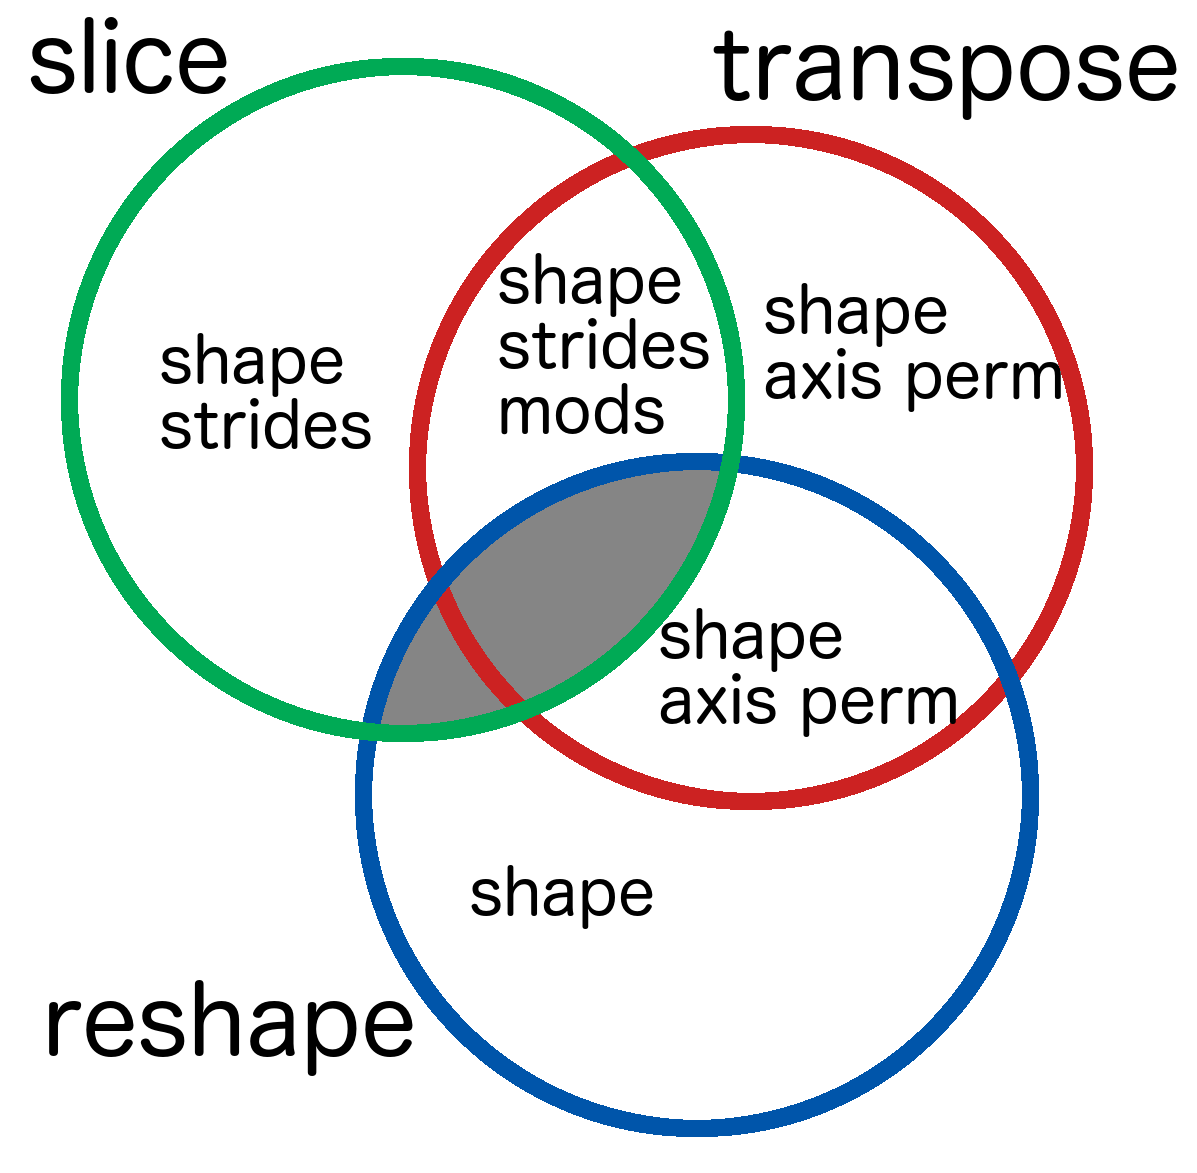 Venn diagram of slice, transpose, and reshape operations, with view implementations possible in each intersection